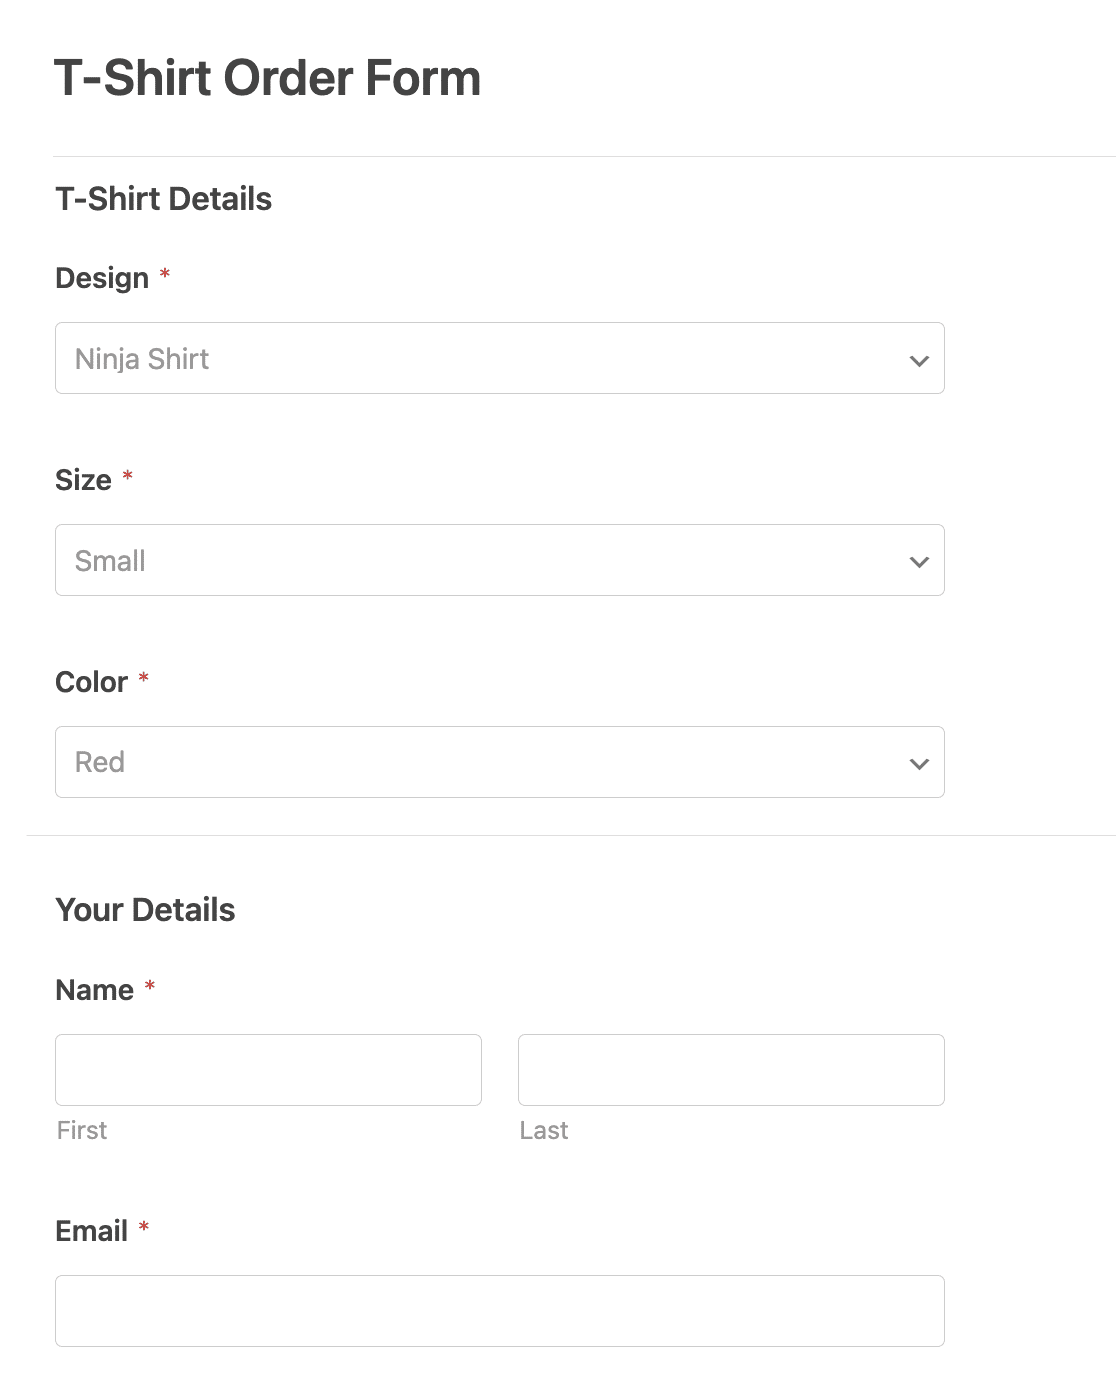 The Tshirt Order Form template